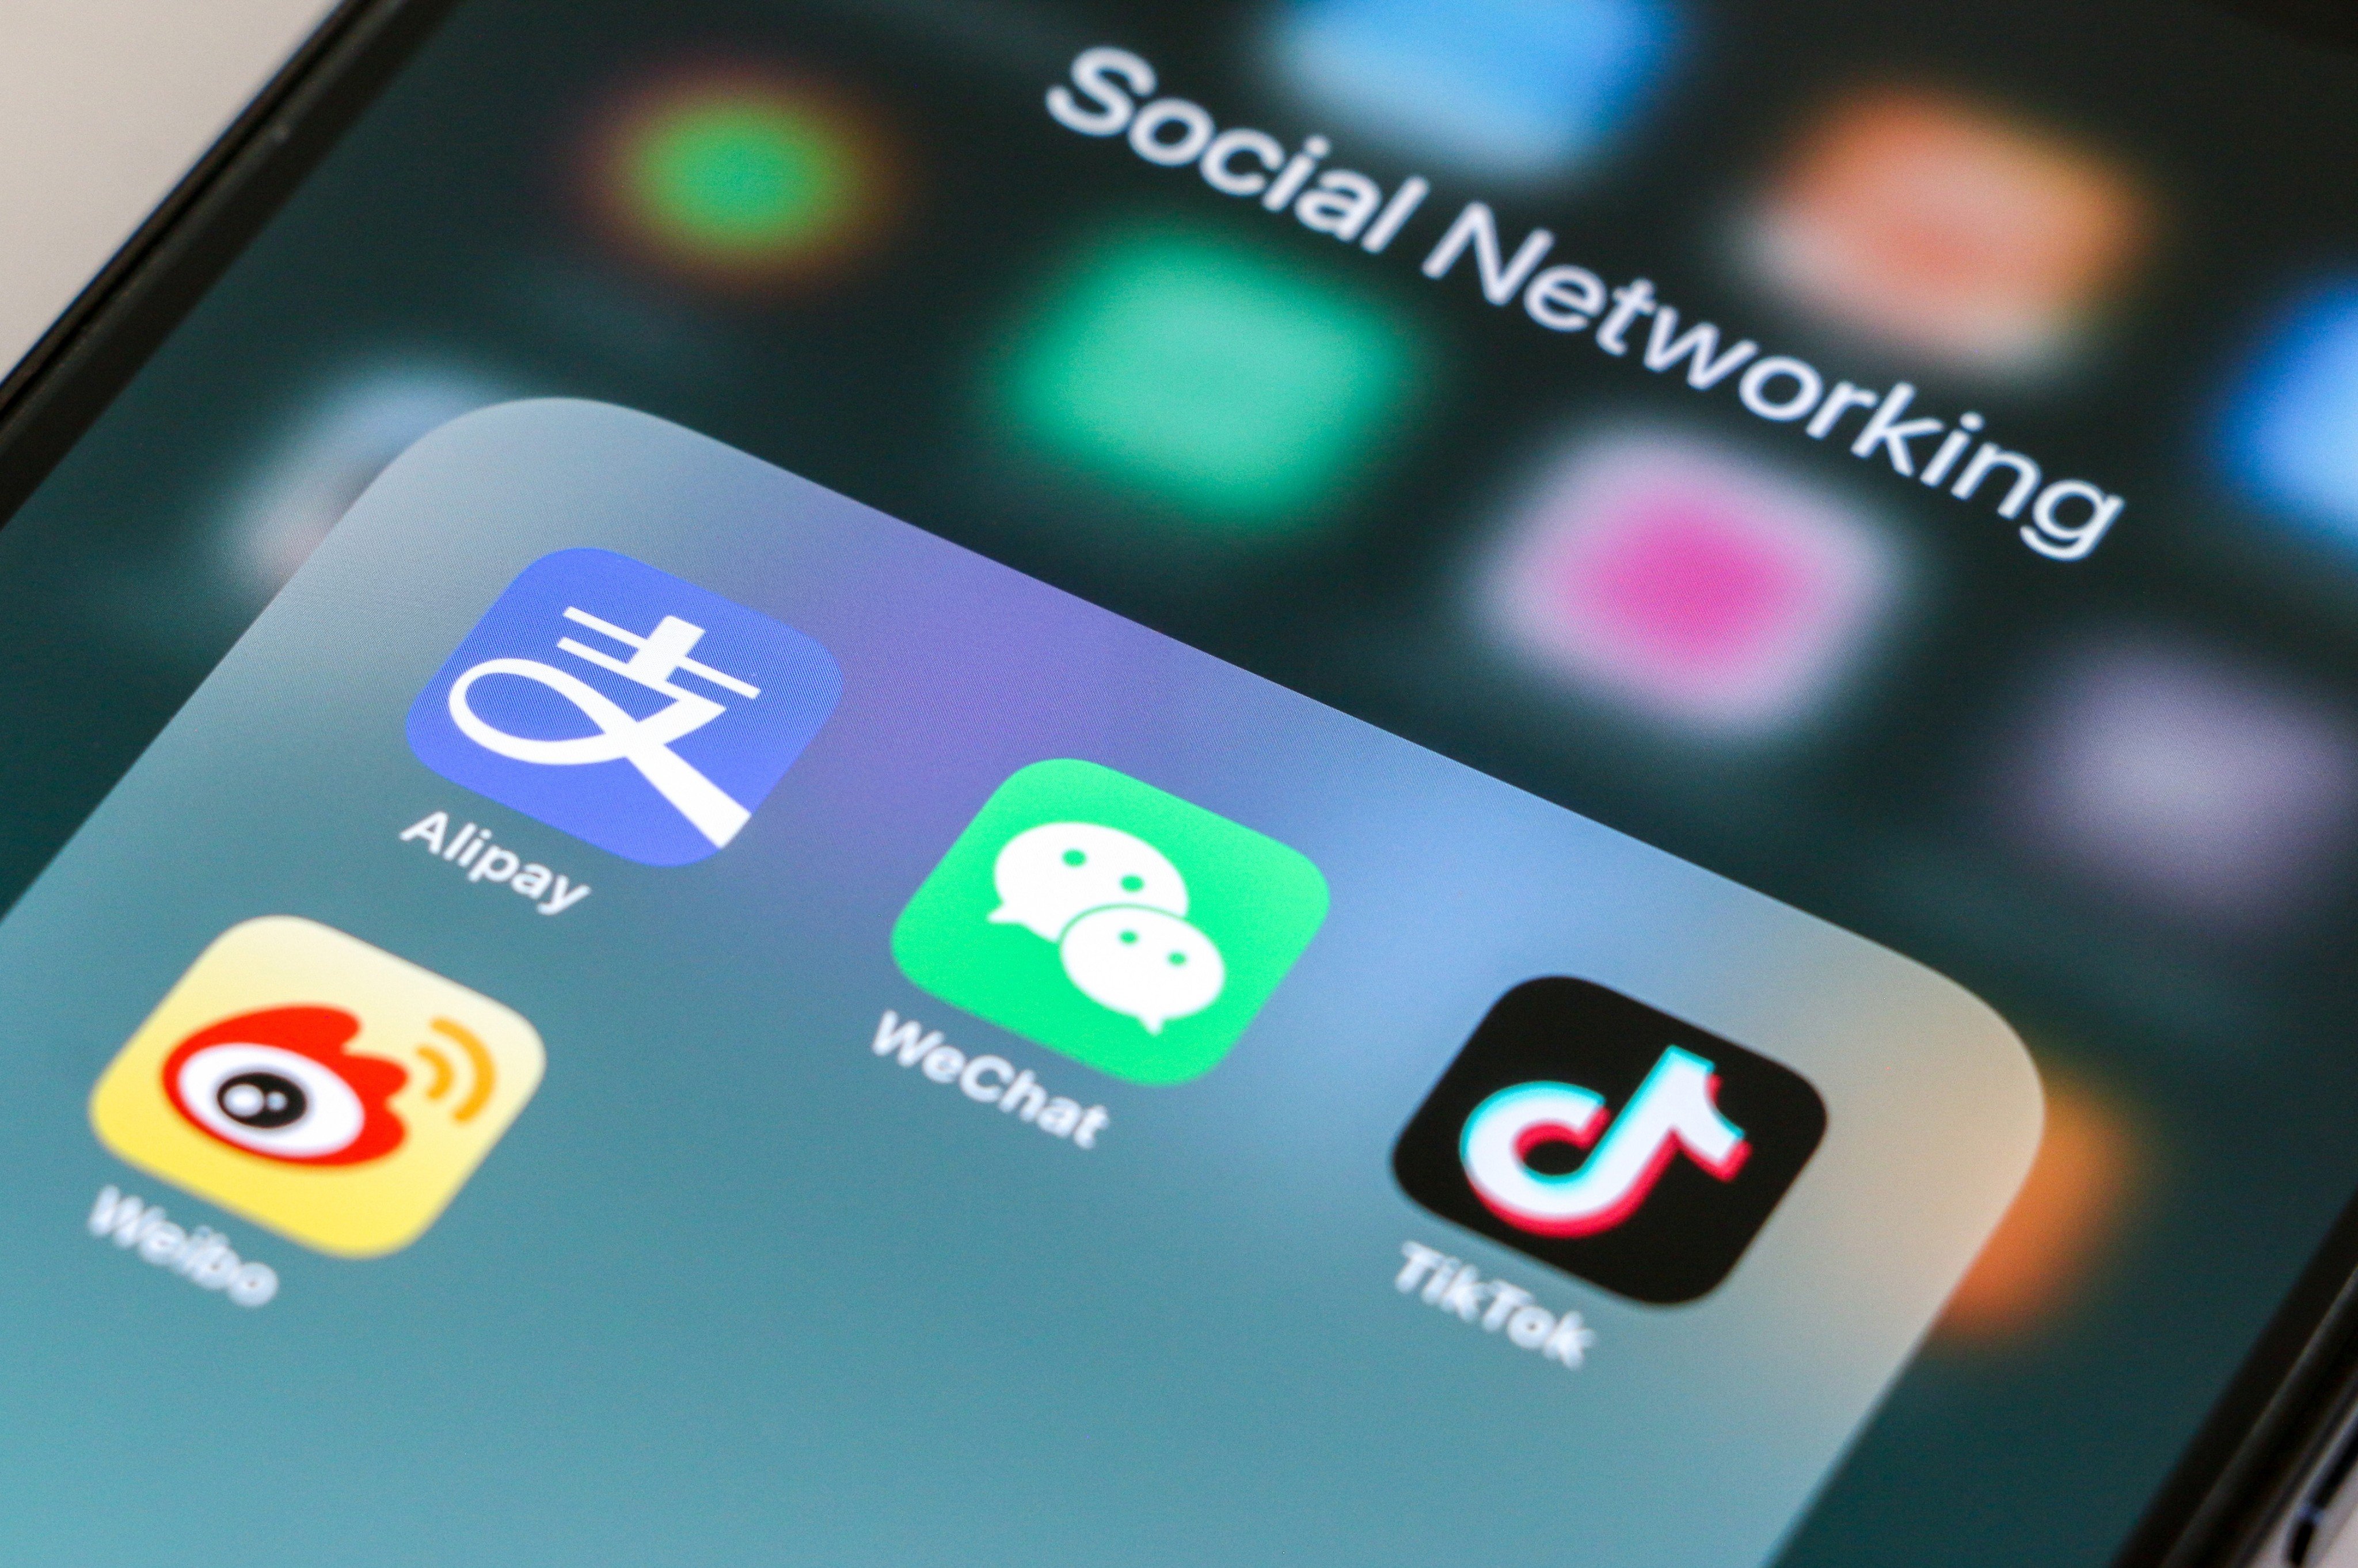 Many local government agencies in China have had to cut contract workers who are typically responsible for updating social media accounts.
Photo: Shutterstock